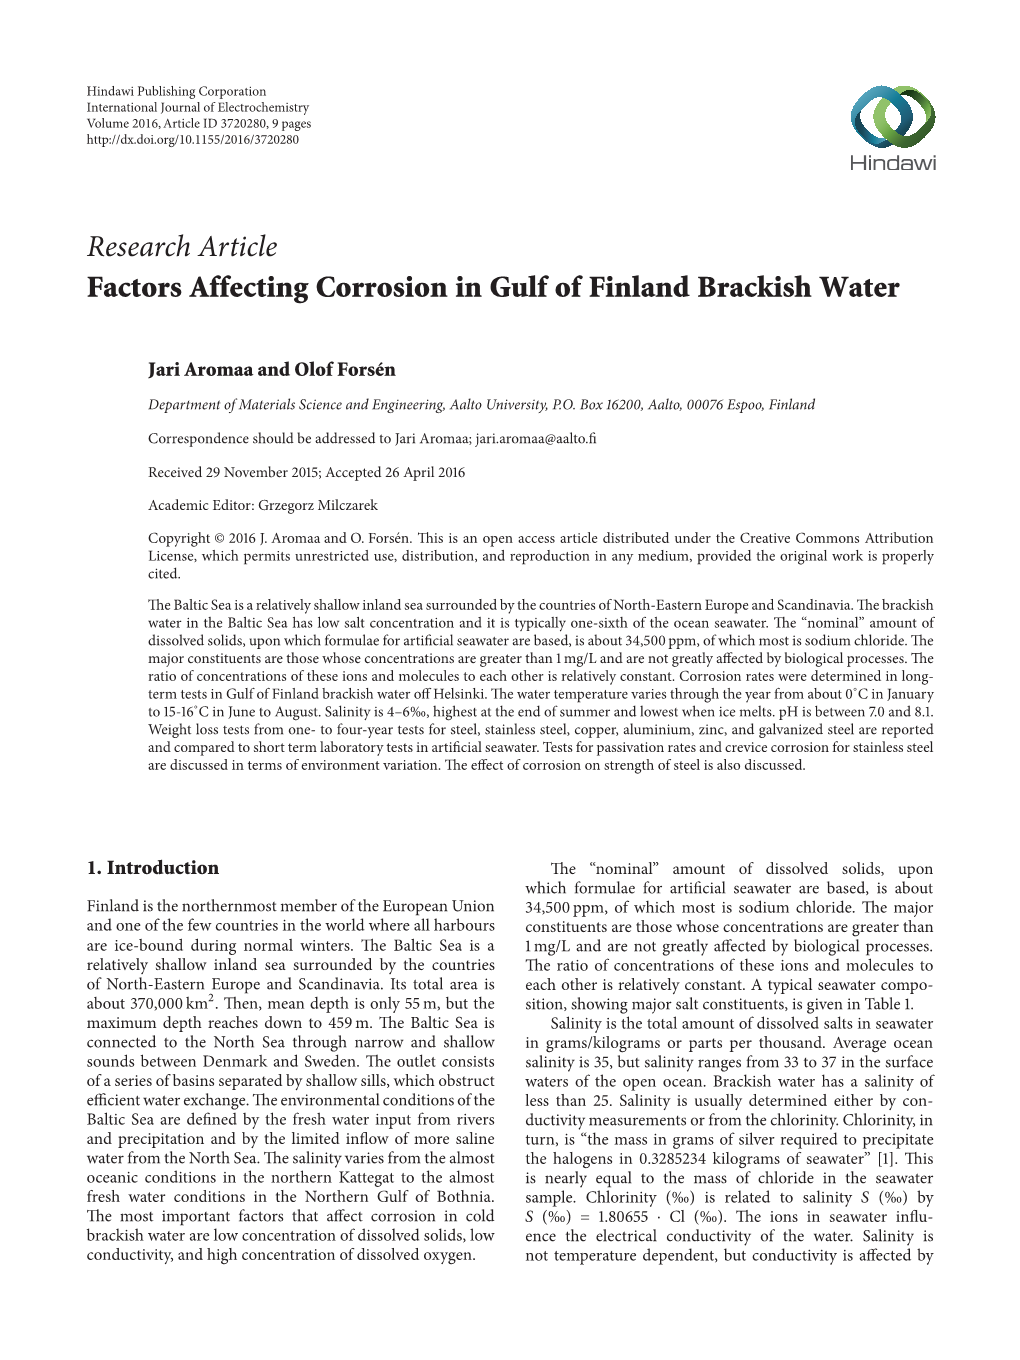 Research Article Factors Affecting Corrosion in Gulf of Finland Brackish Water